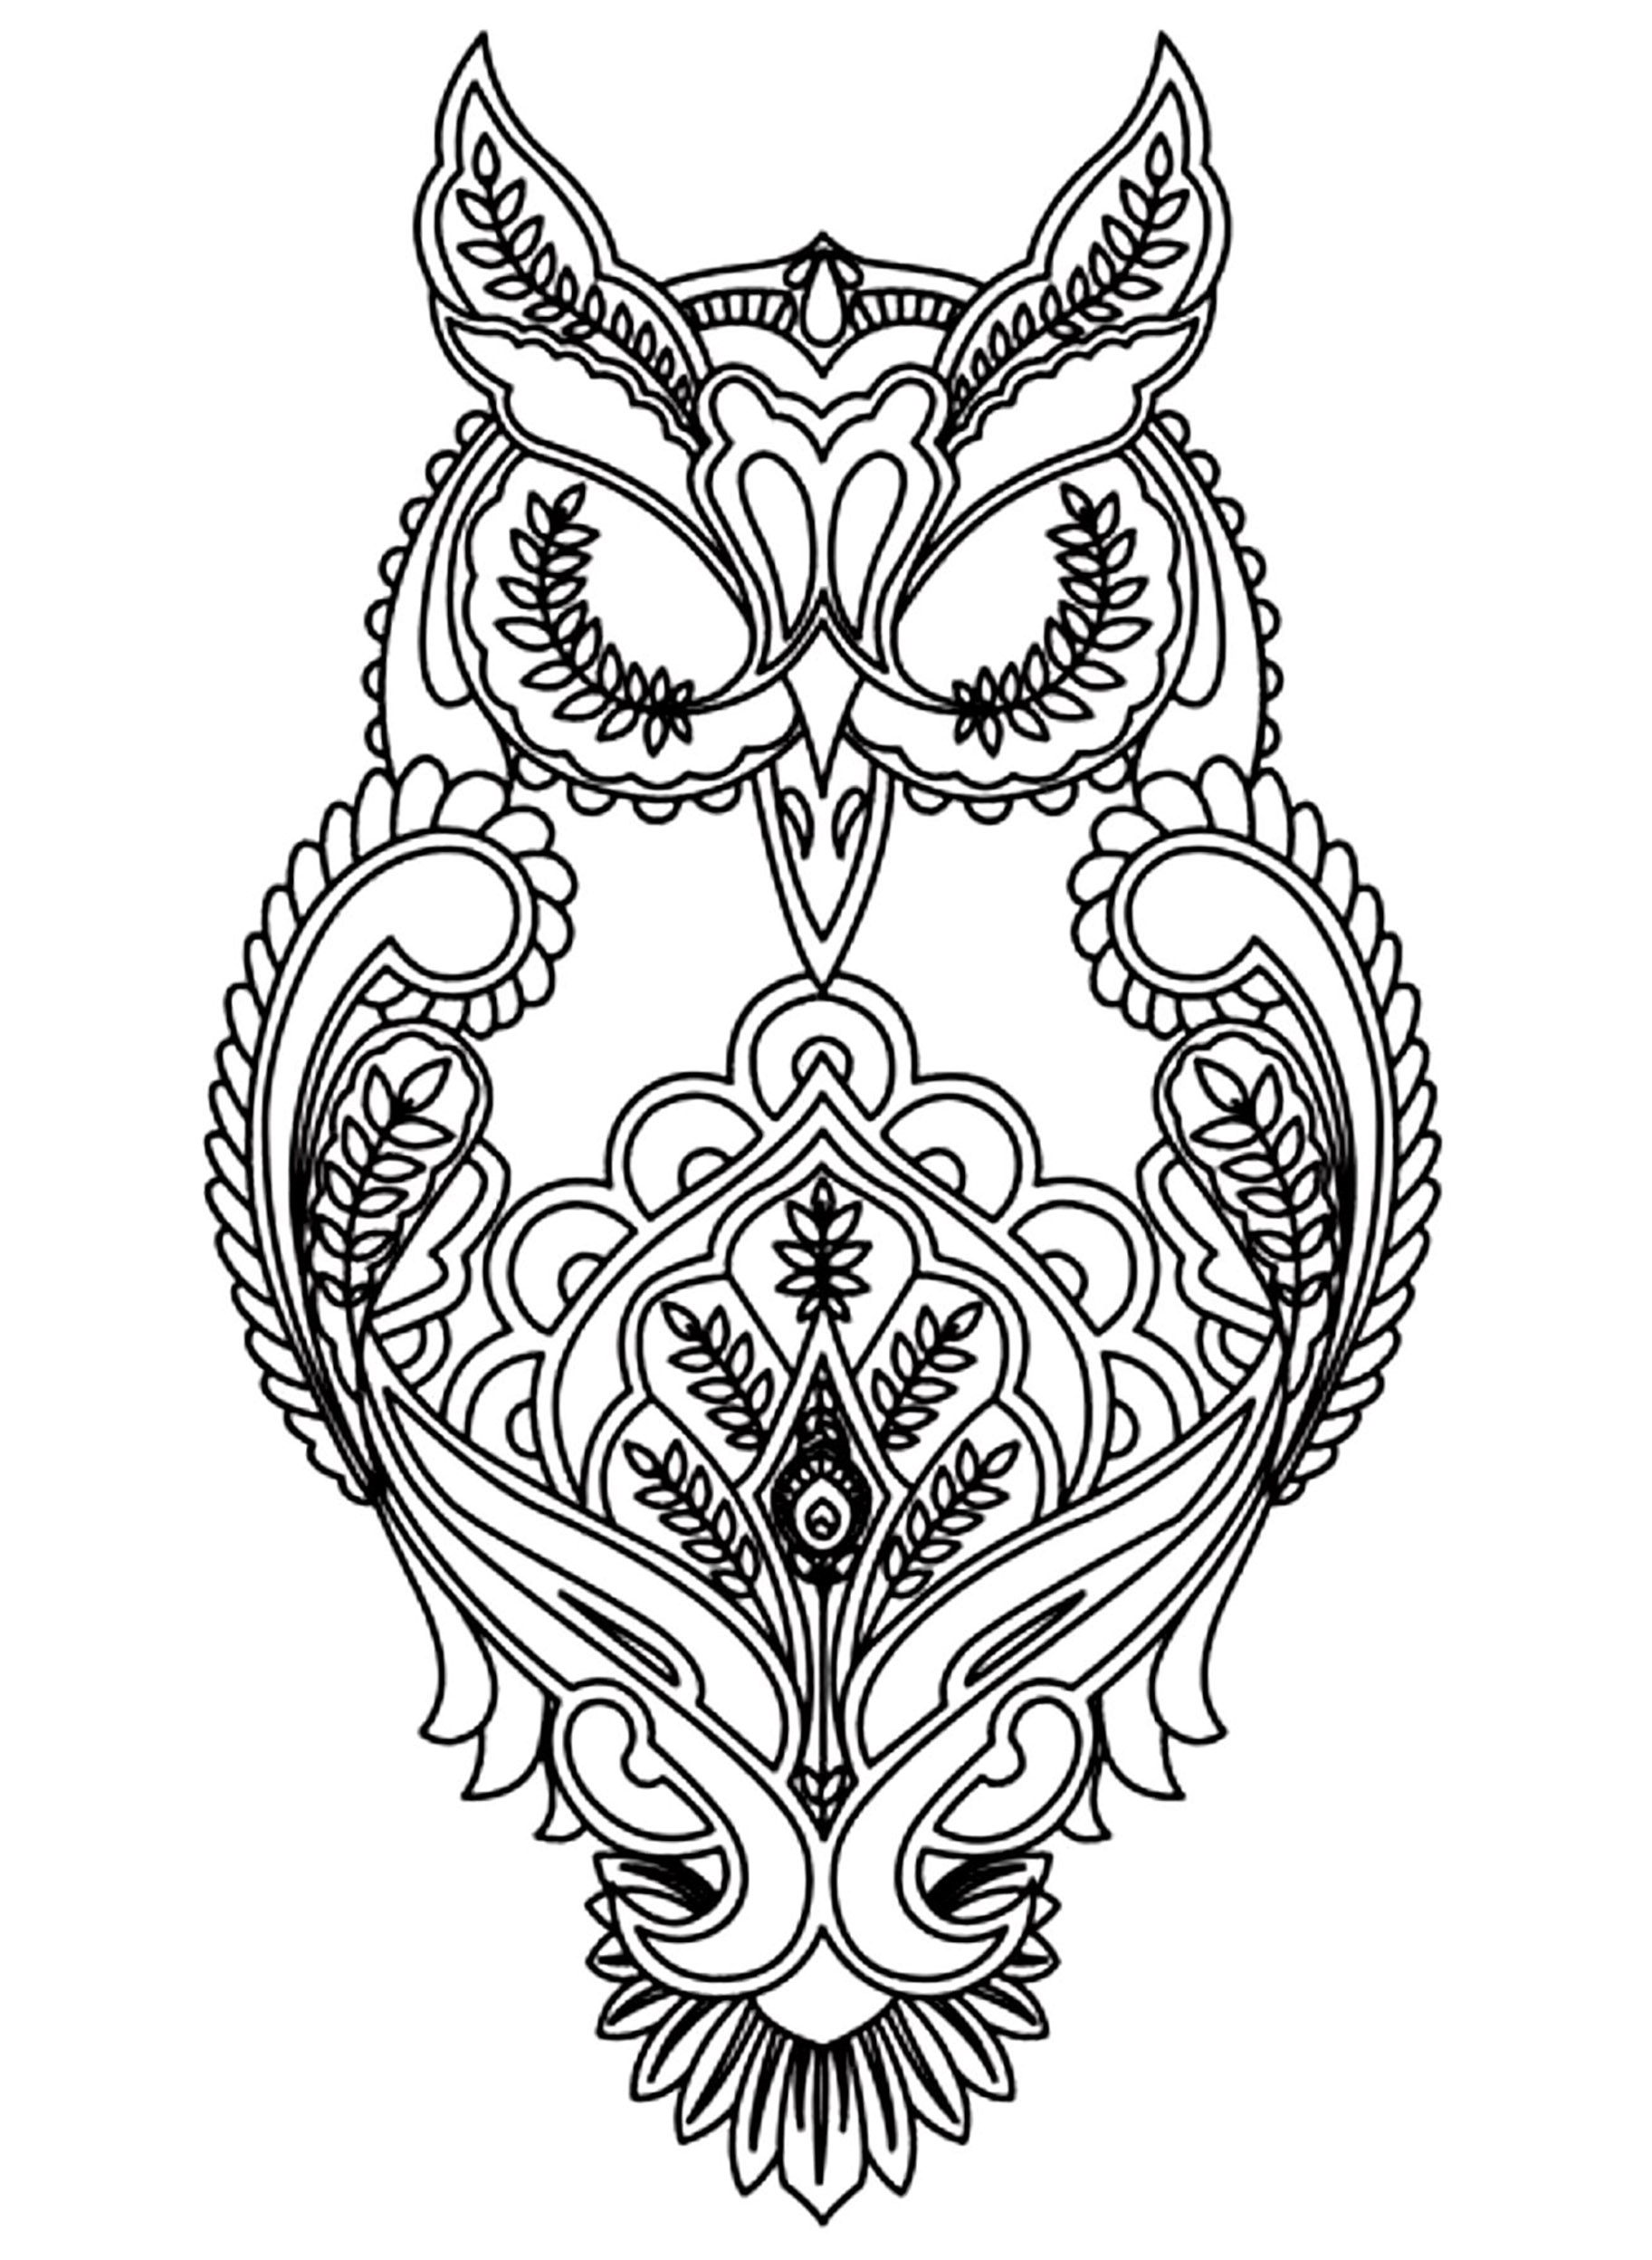 Owl - Owls Adult Coloring Pages